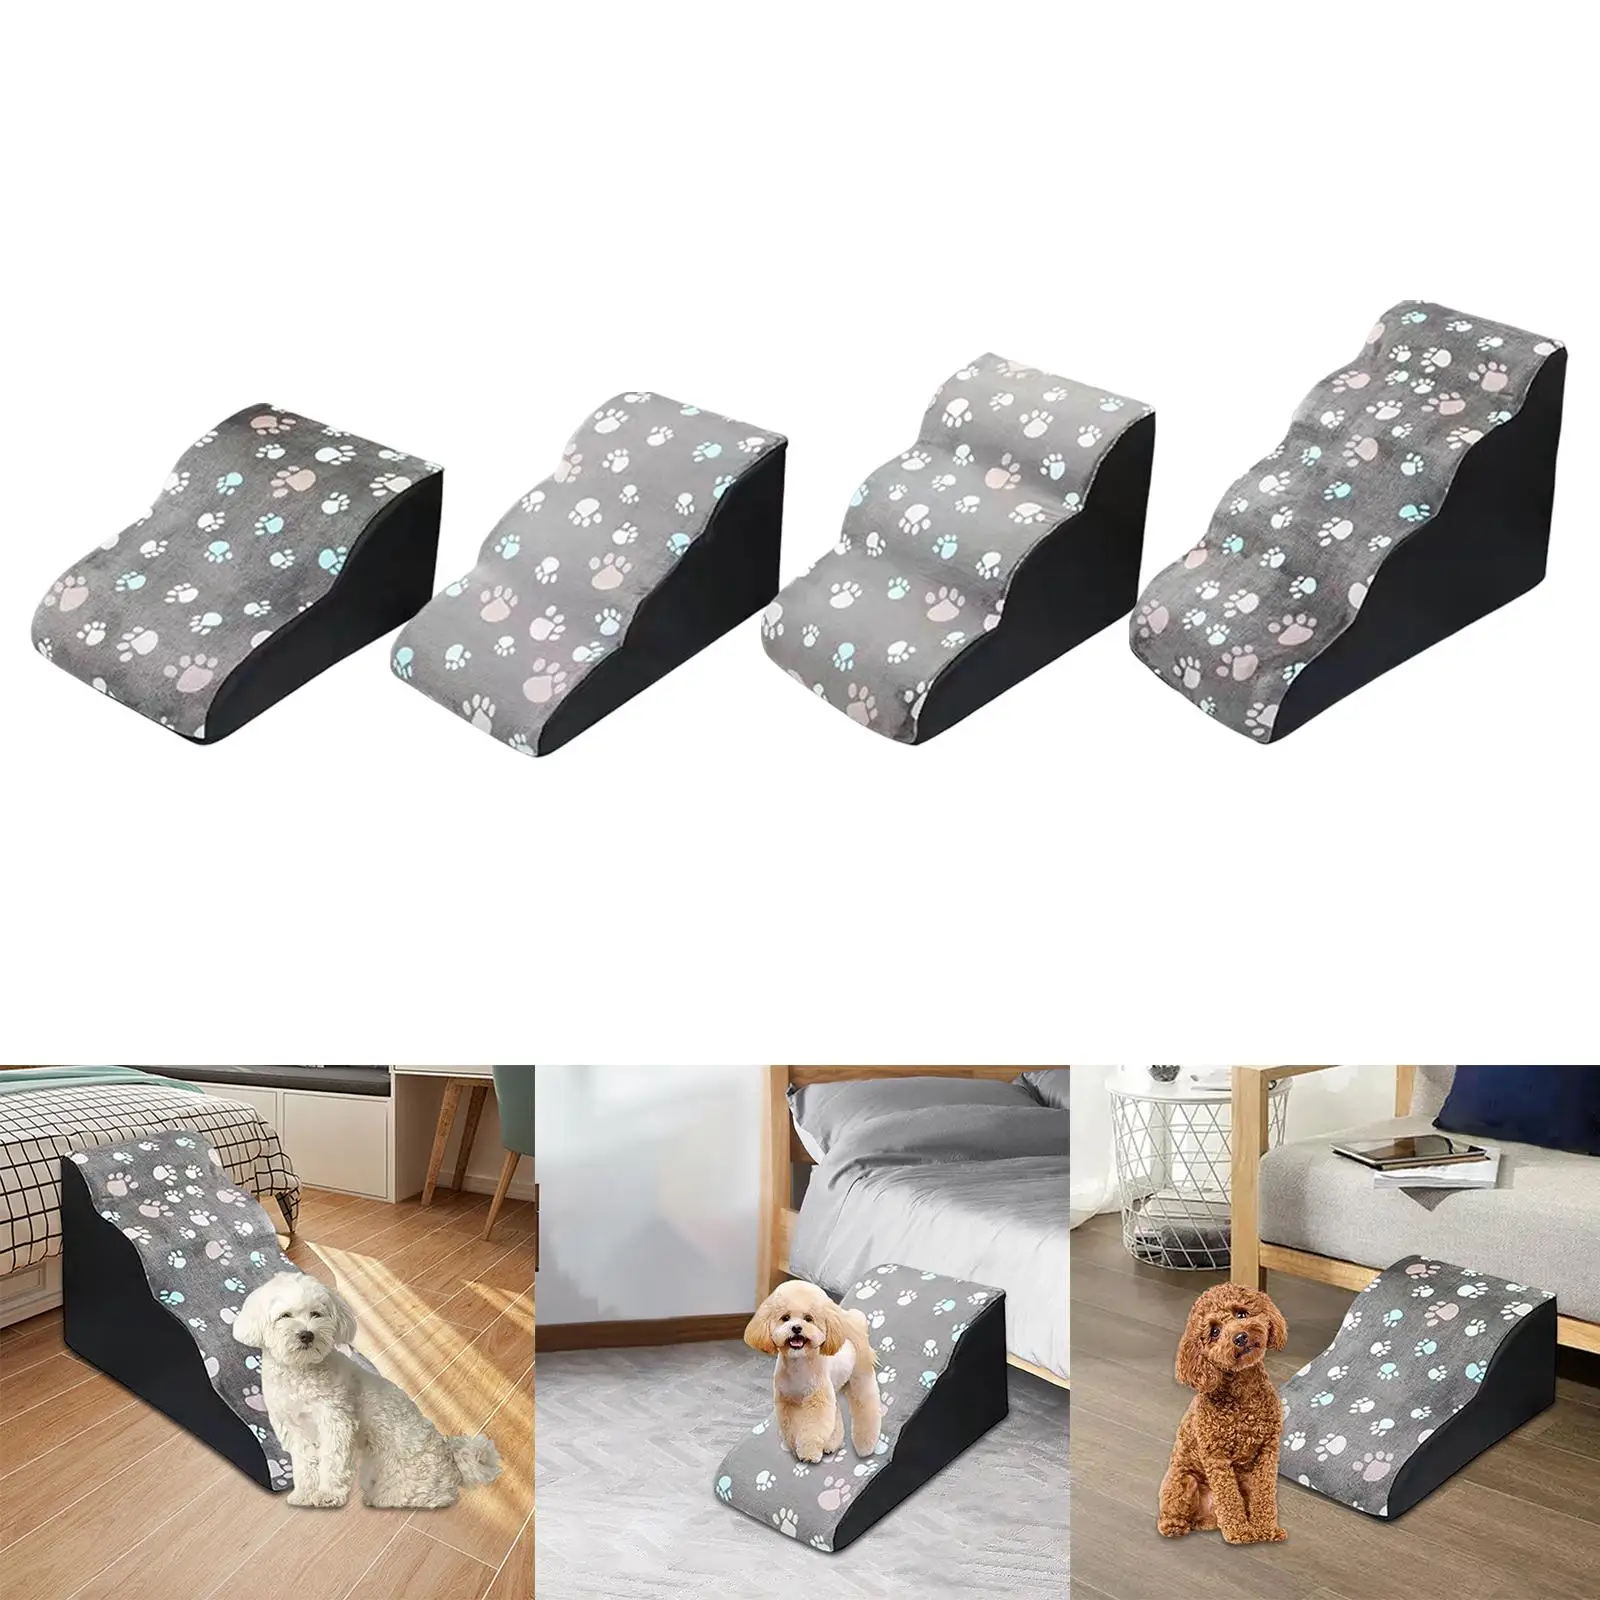 Comfortable Pet Dog Stairs Dog Ladder Ramp Washable Cover Couch for Indoor